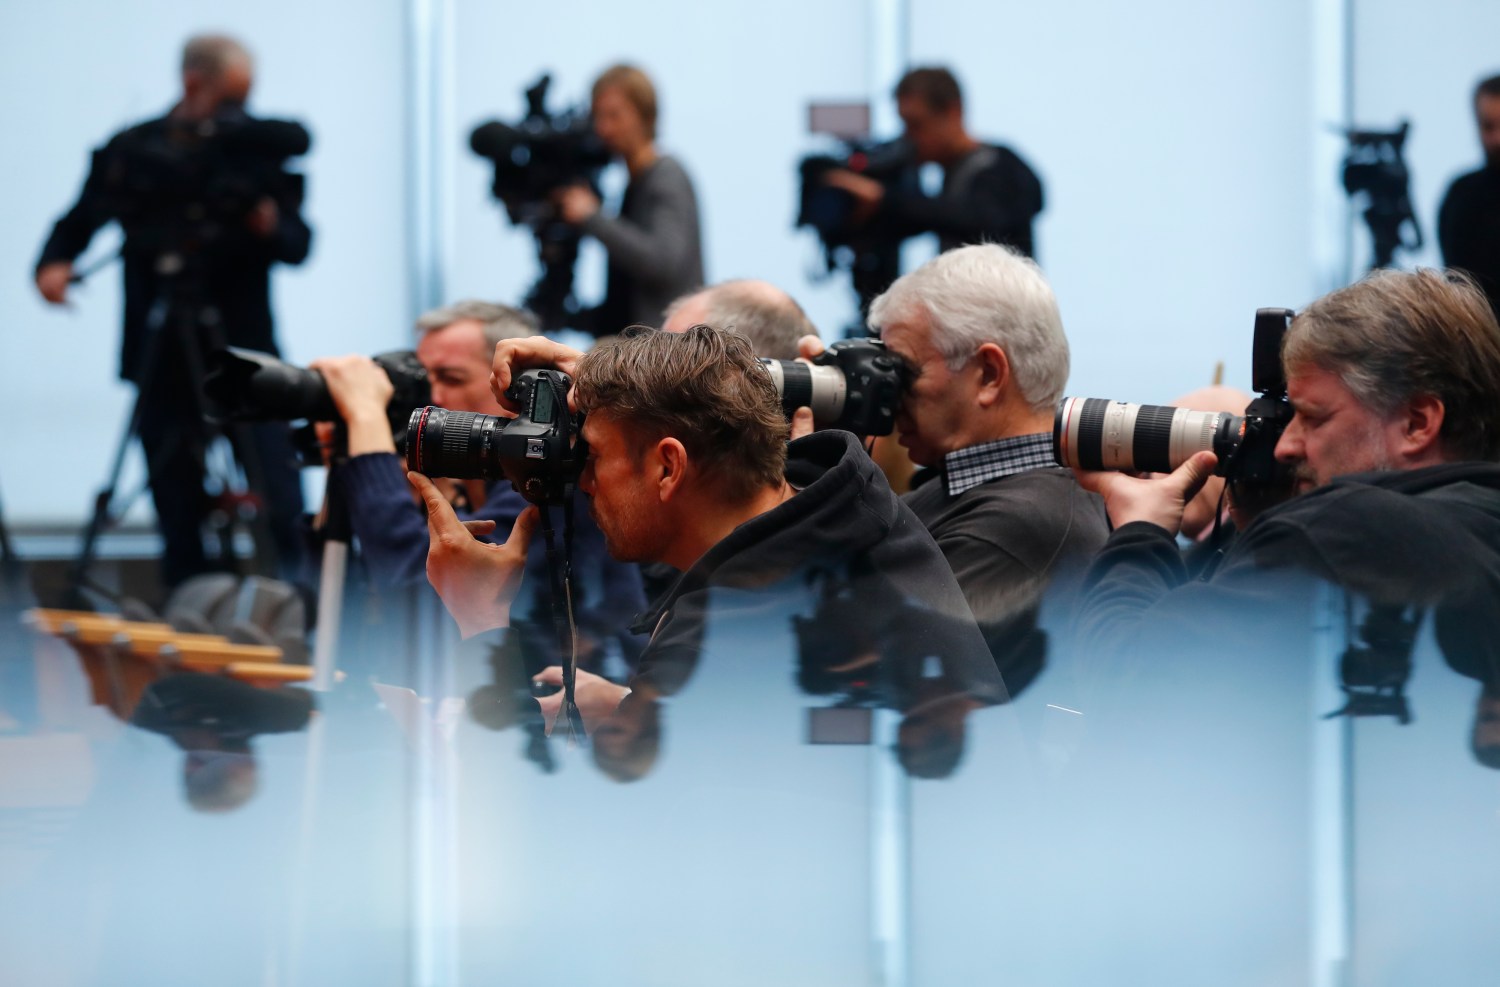 Journalists take pictures during a news conference